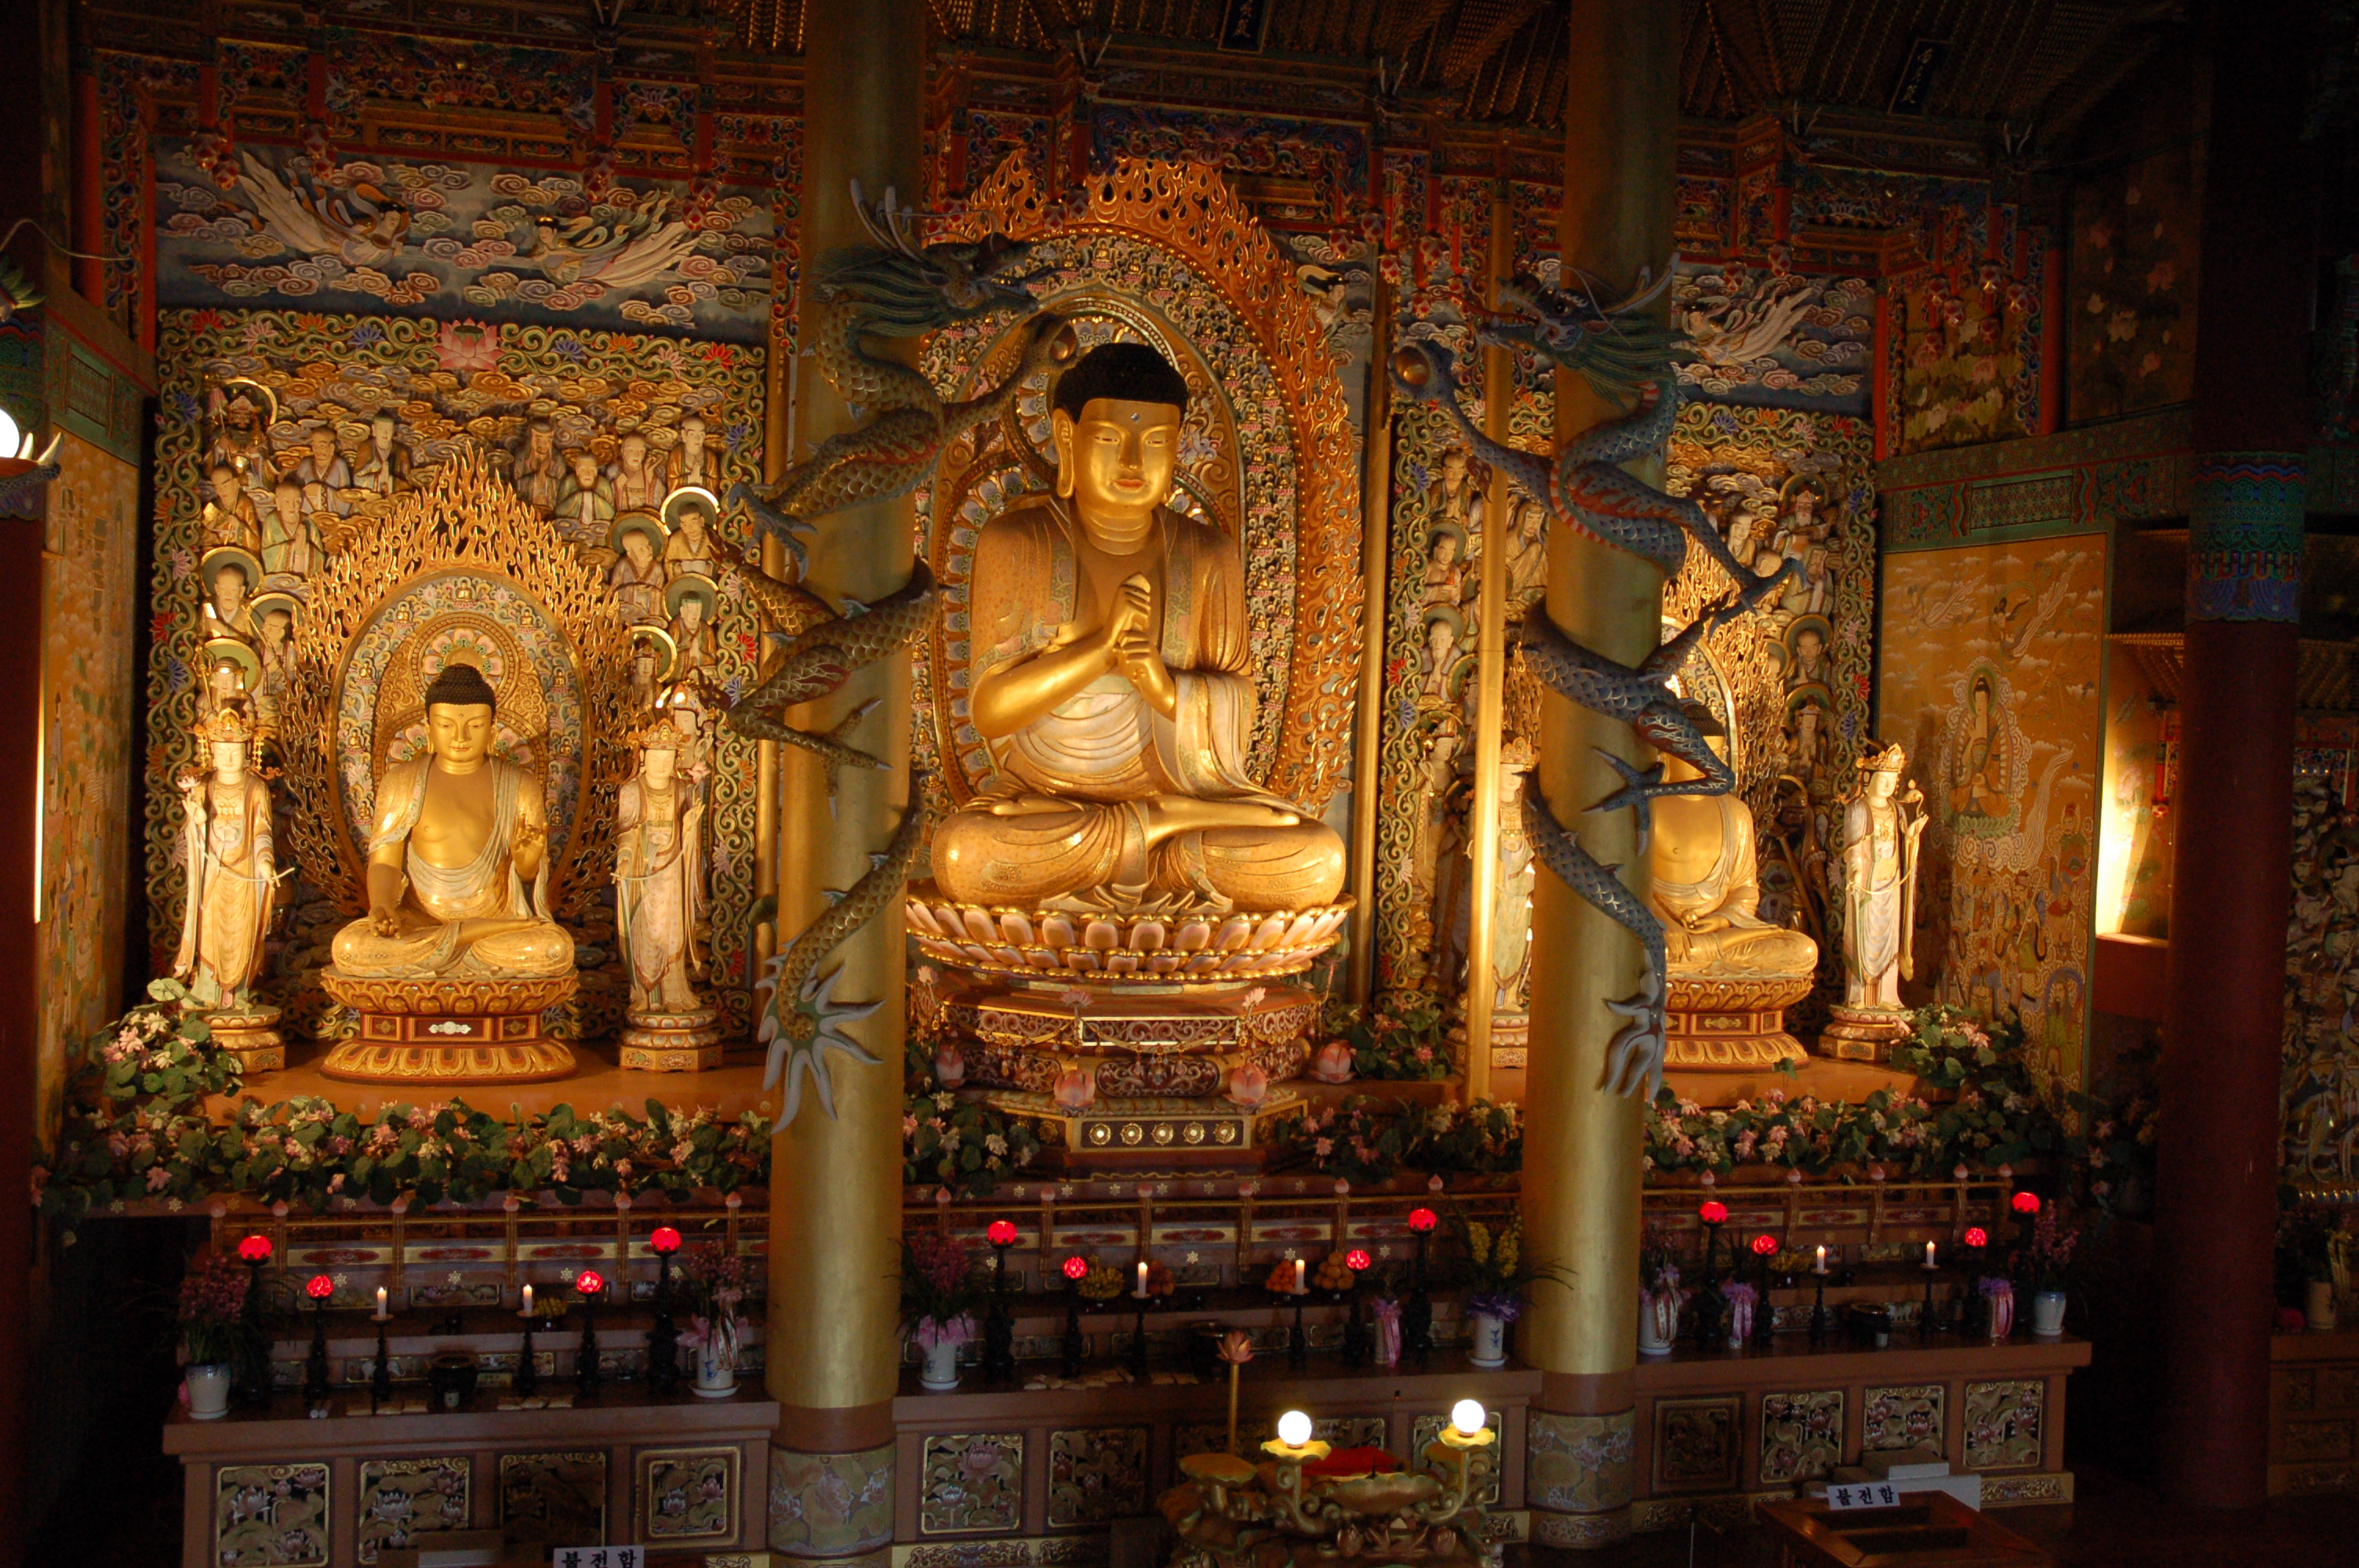 File:Buddha statues in a temple on Jejudo.jpg - Wikimedia Commons